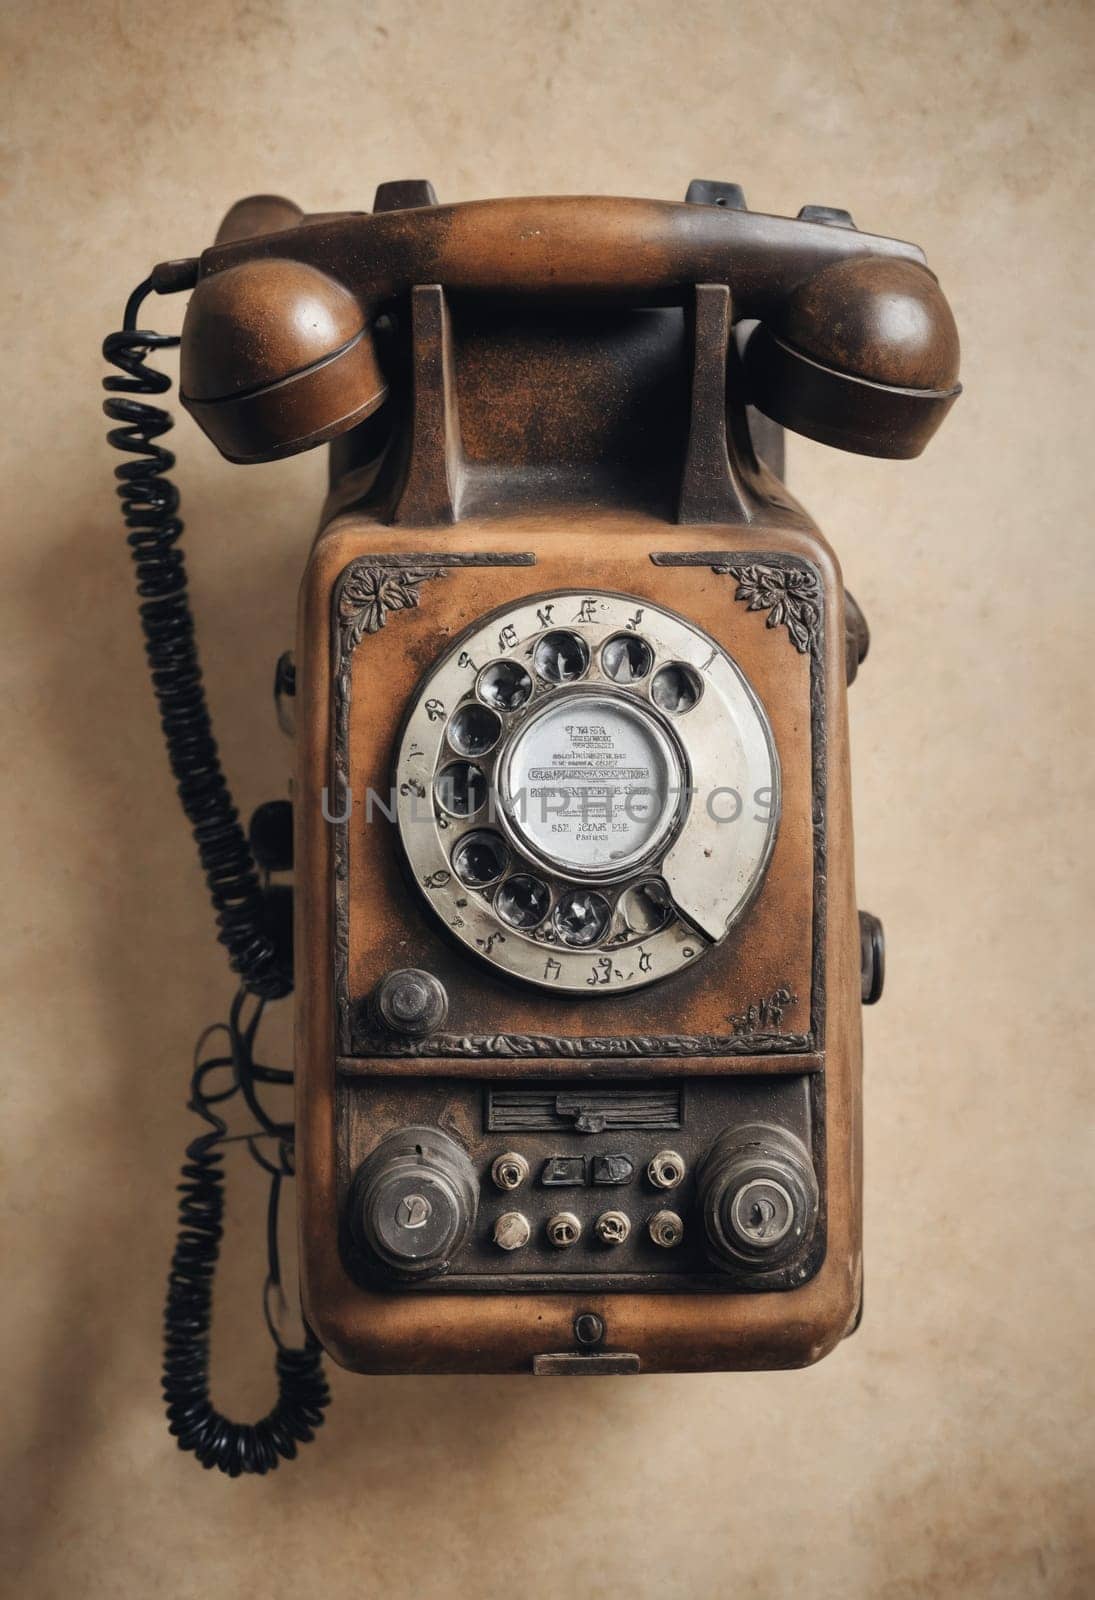 Retro Connection: Brown Rotary Dial Telephone on Wood by Andre1ns